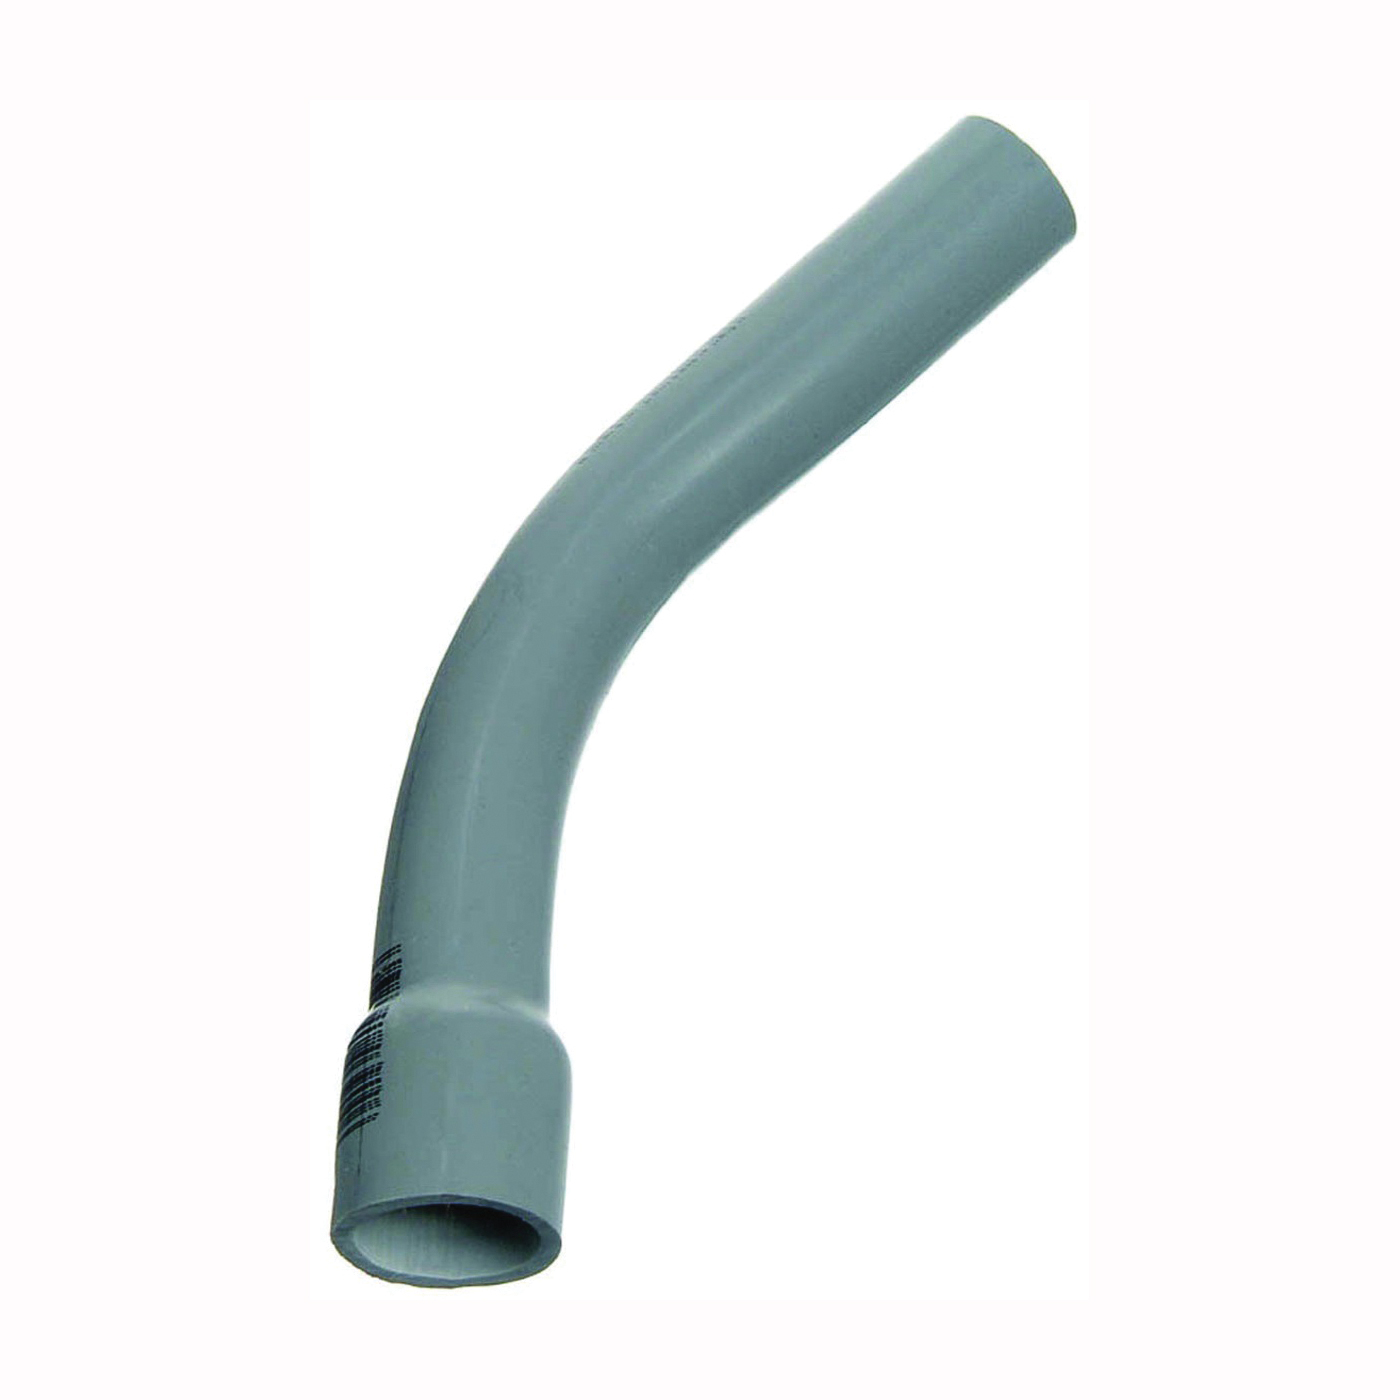 UA7AHB-CAR Elbow, 1-1/2 in Trade Size, 45 deg Angle, SCH 80 Schedule Rating, PVC, Bell End, Gray